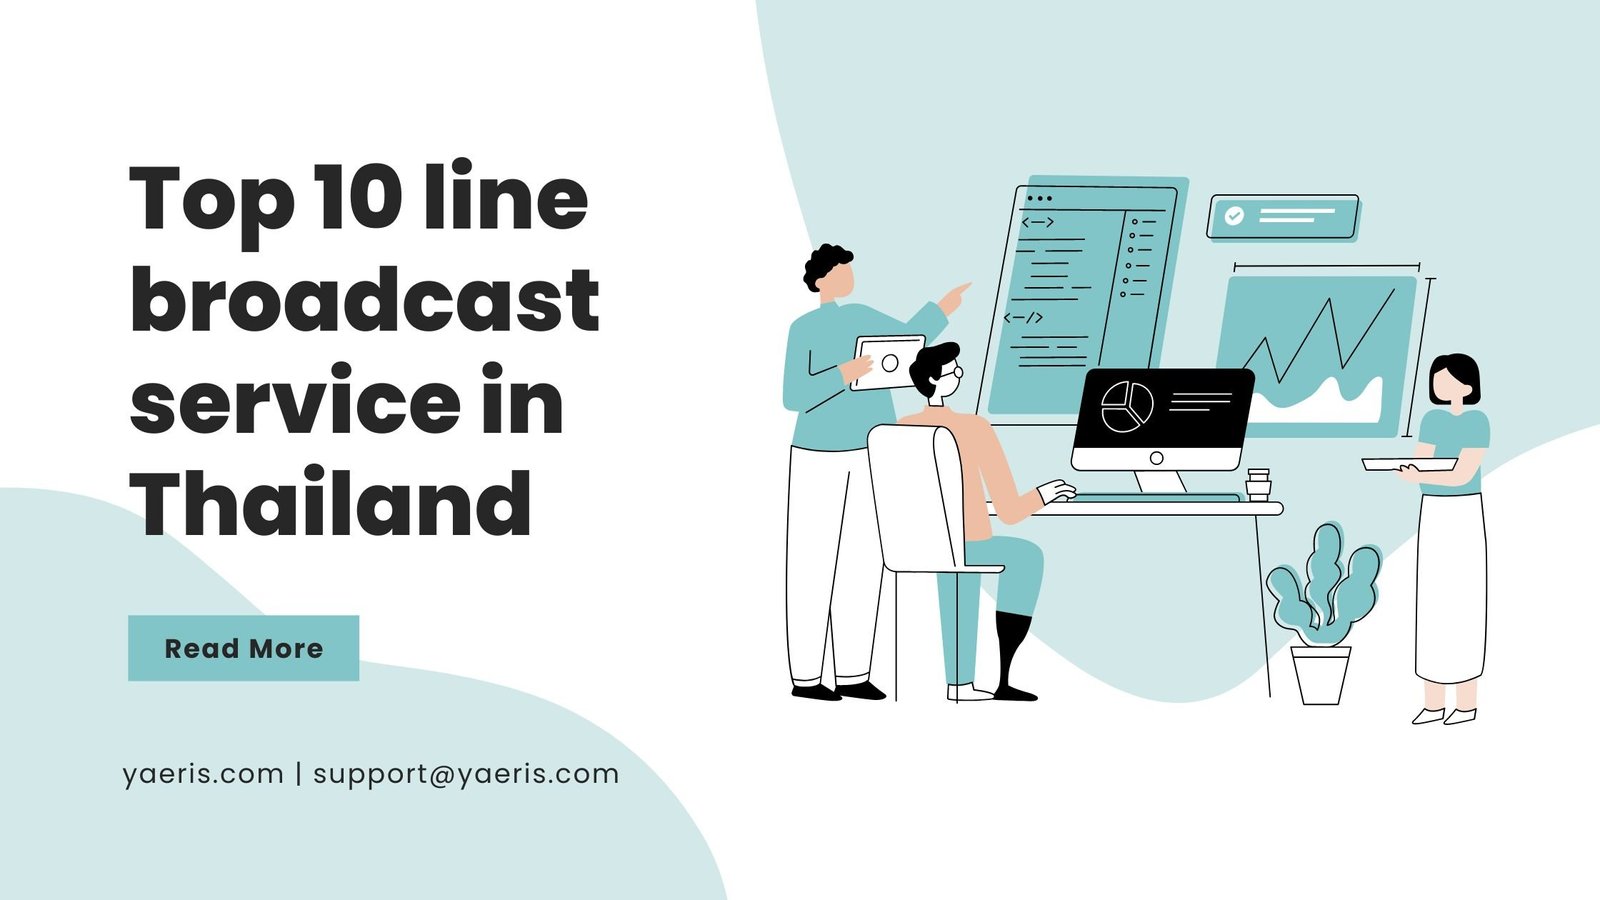 Top 10 line broadcast service in Thailand